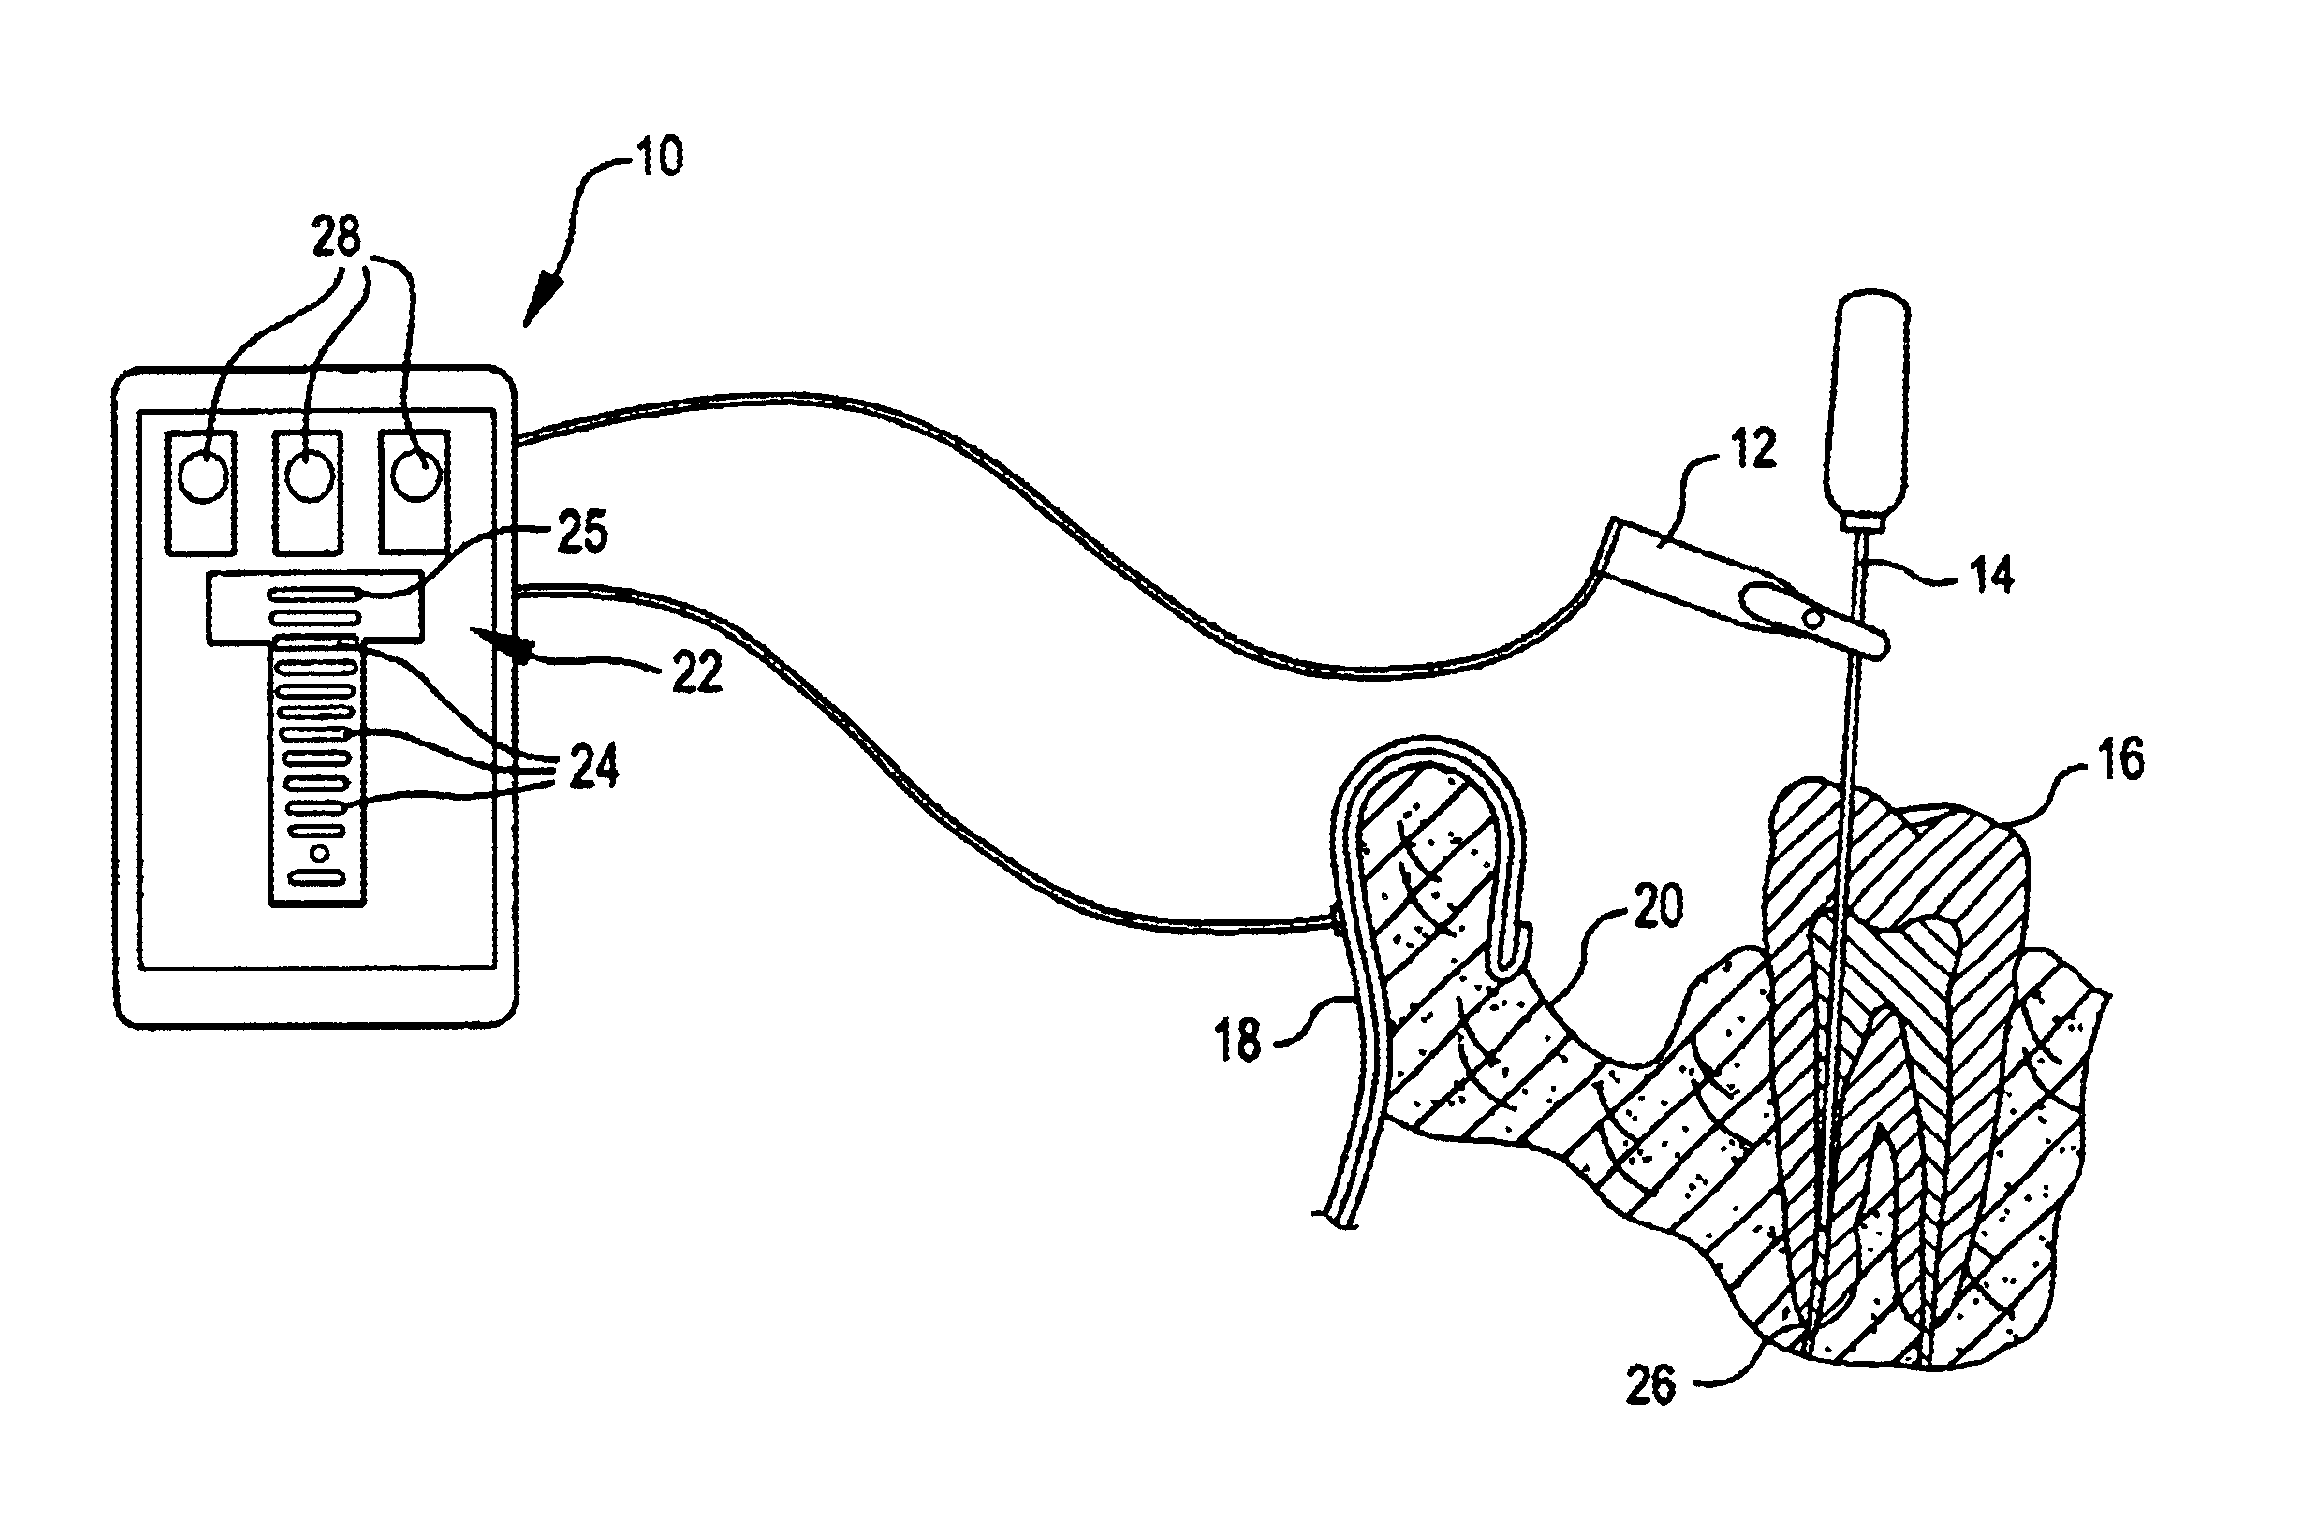 Systems and methods for locating a tooth's apical foramen